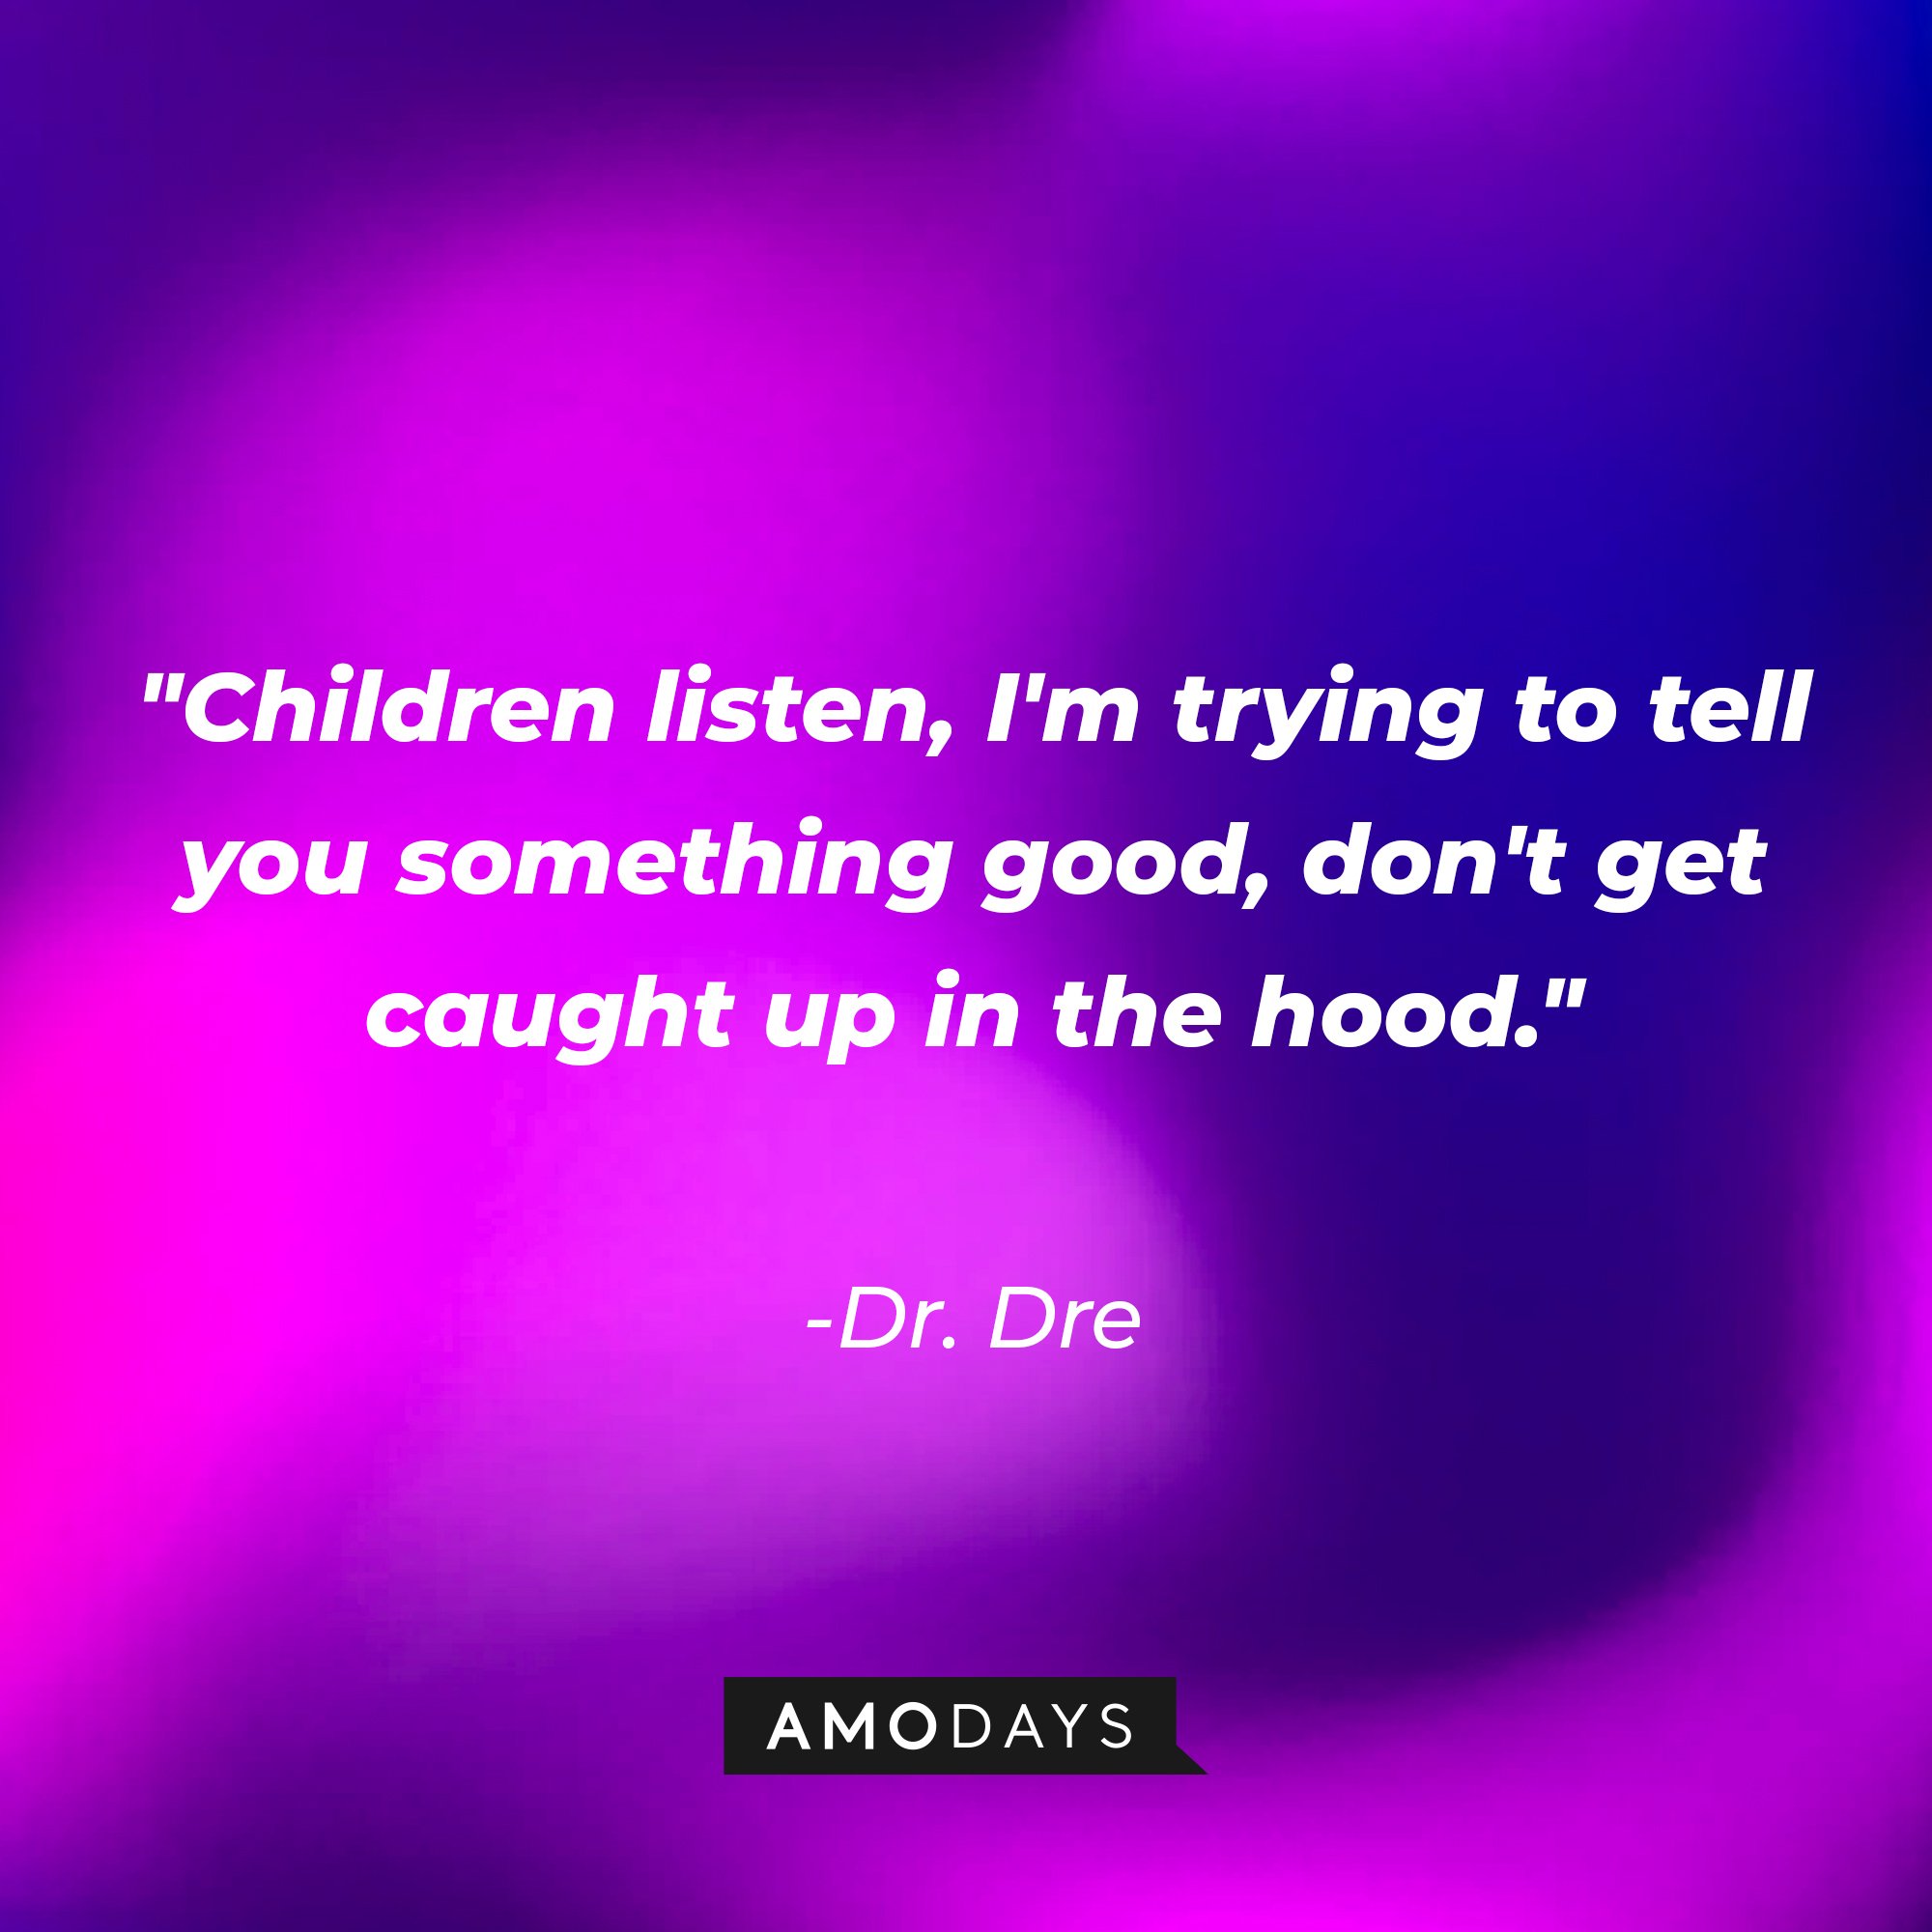 Dr. Dre's quote: "Children listen, I'm trying to tell you something good, don't get caught up in the hood." | Image: AmoDays